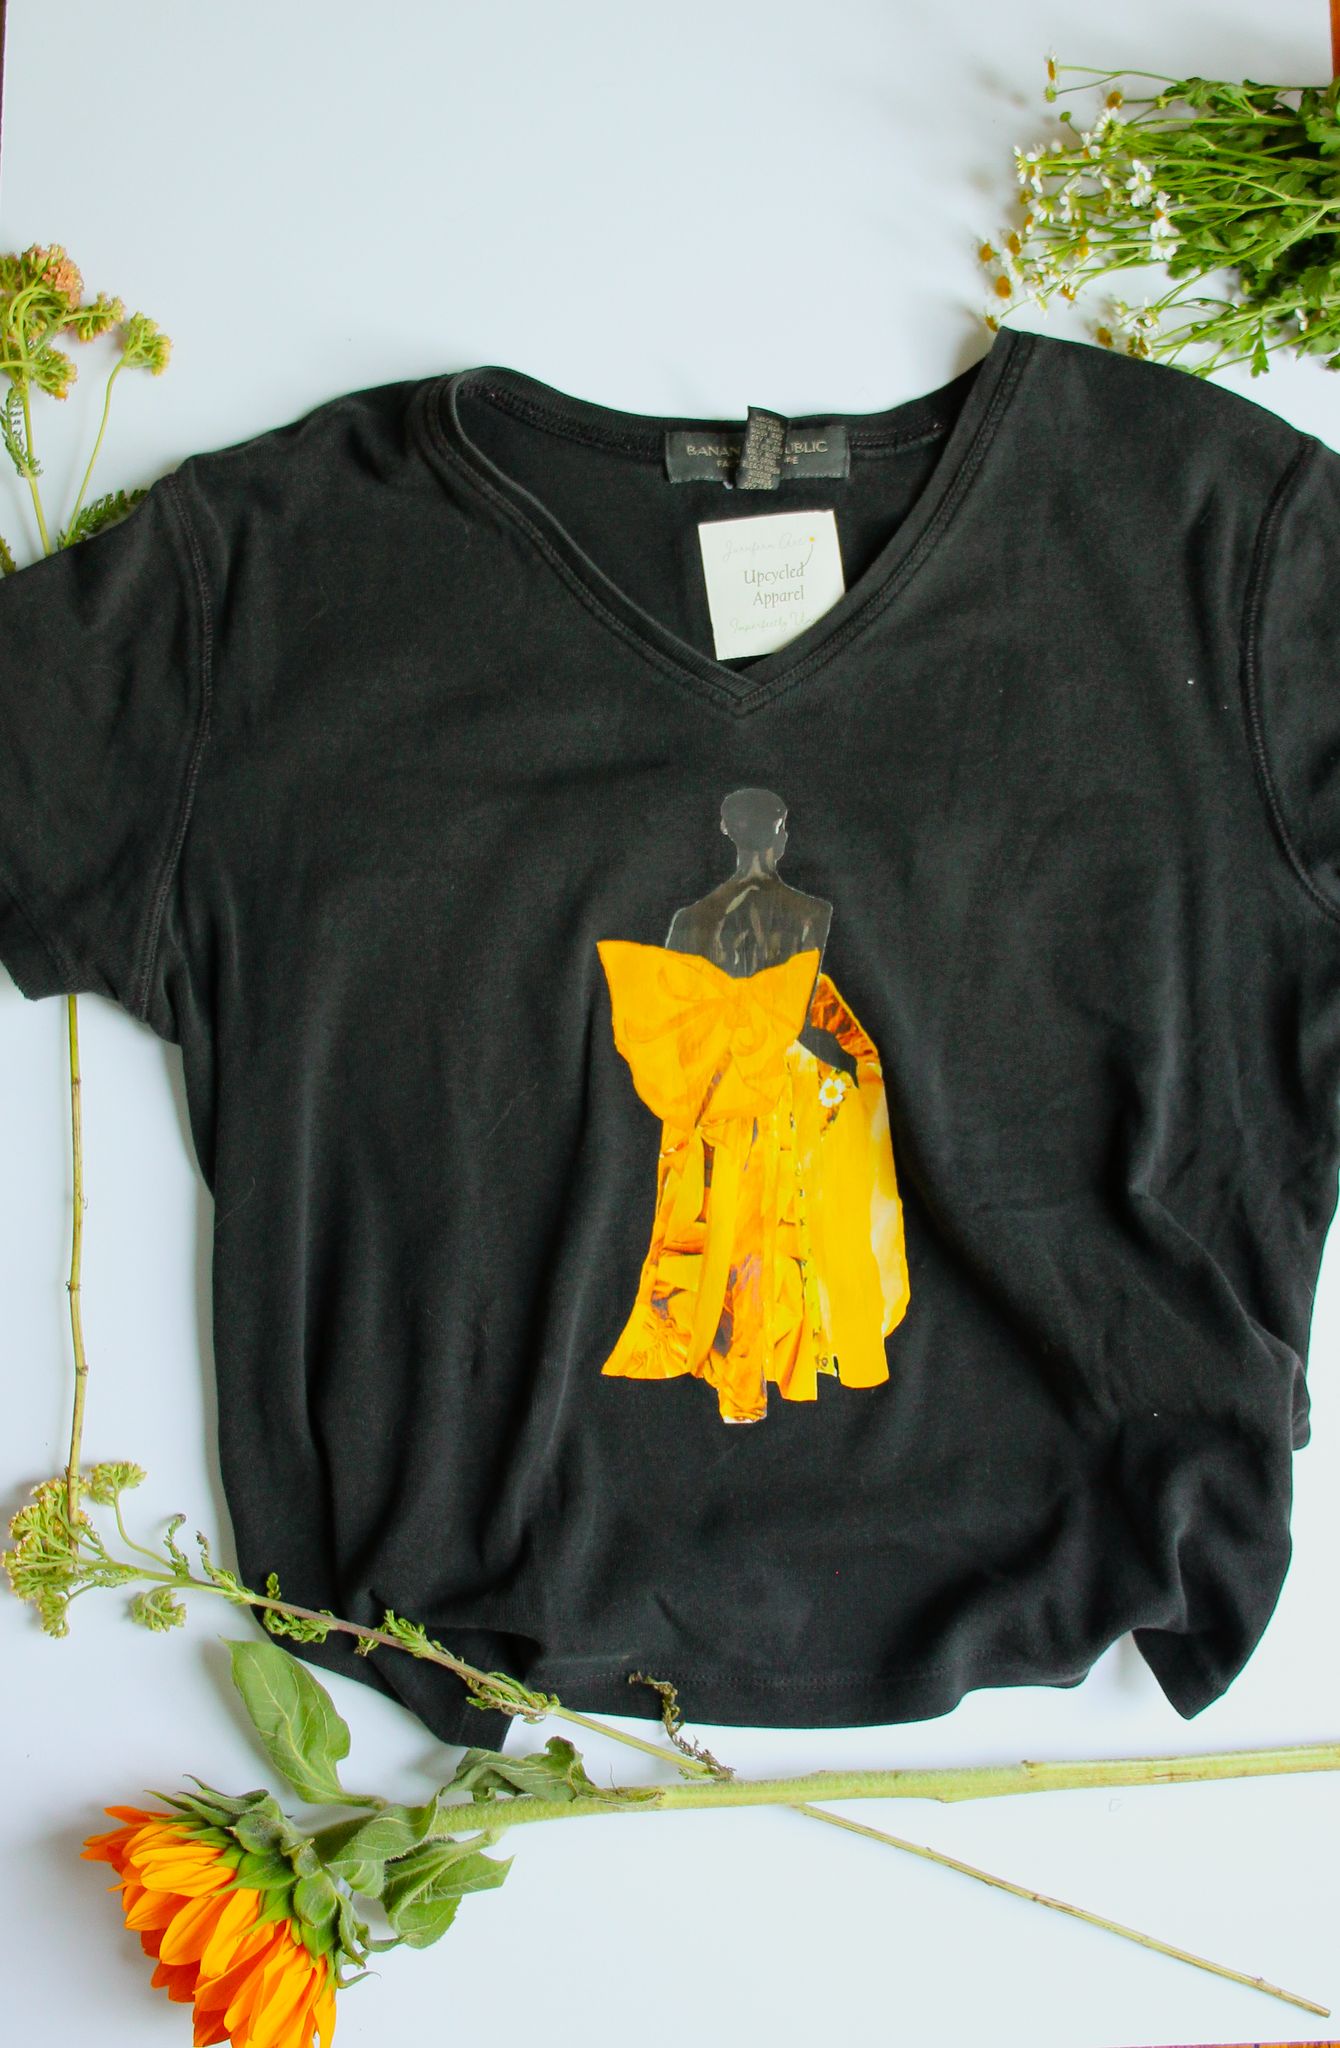 An upcycled black V-neck t-shirt with an image of model Akiima Ajak wearing a yellow gown on it